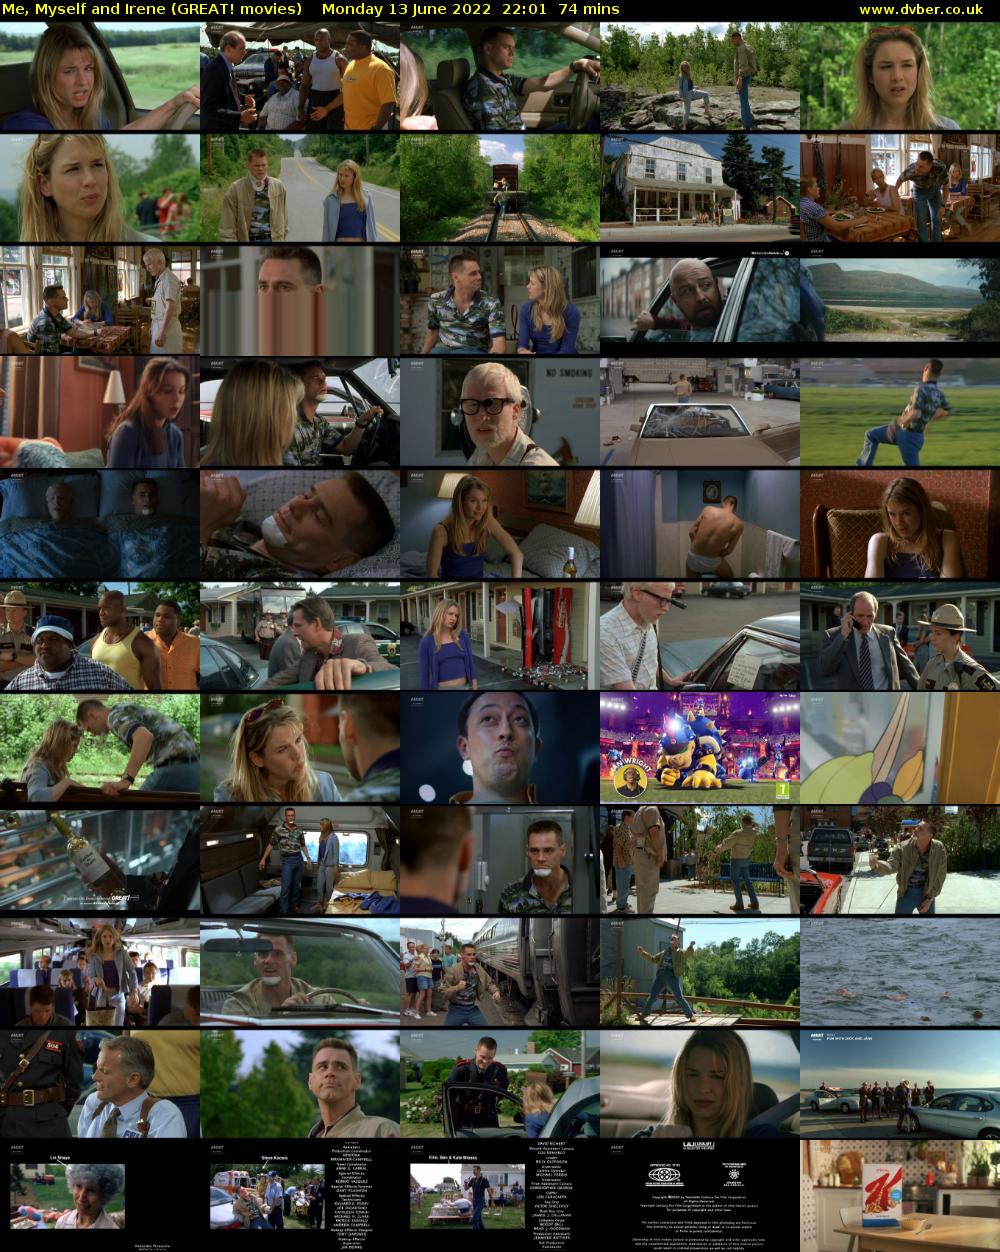 Me, Myself and Irene (GREAT! movies) Monday 13 June 2022 22:01 - 23:15